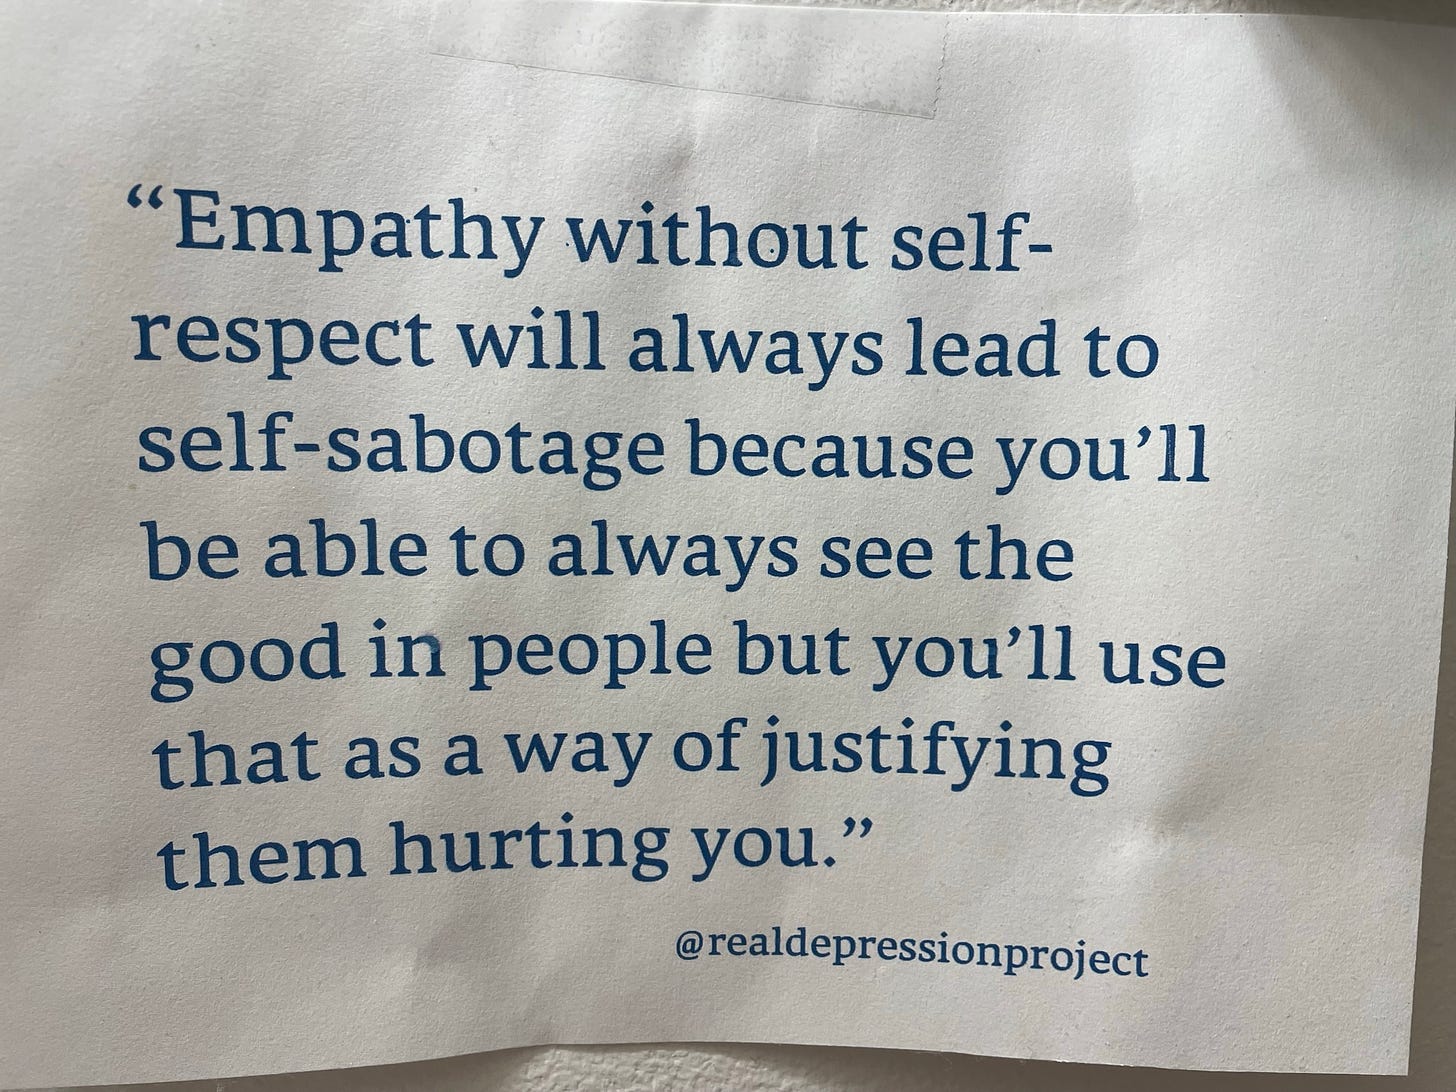 A meme saying "empathy without self-respect will always lead to self-sabotage because you'll be able to see the good in people but you'll use that as a way of justifying them hurting you: